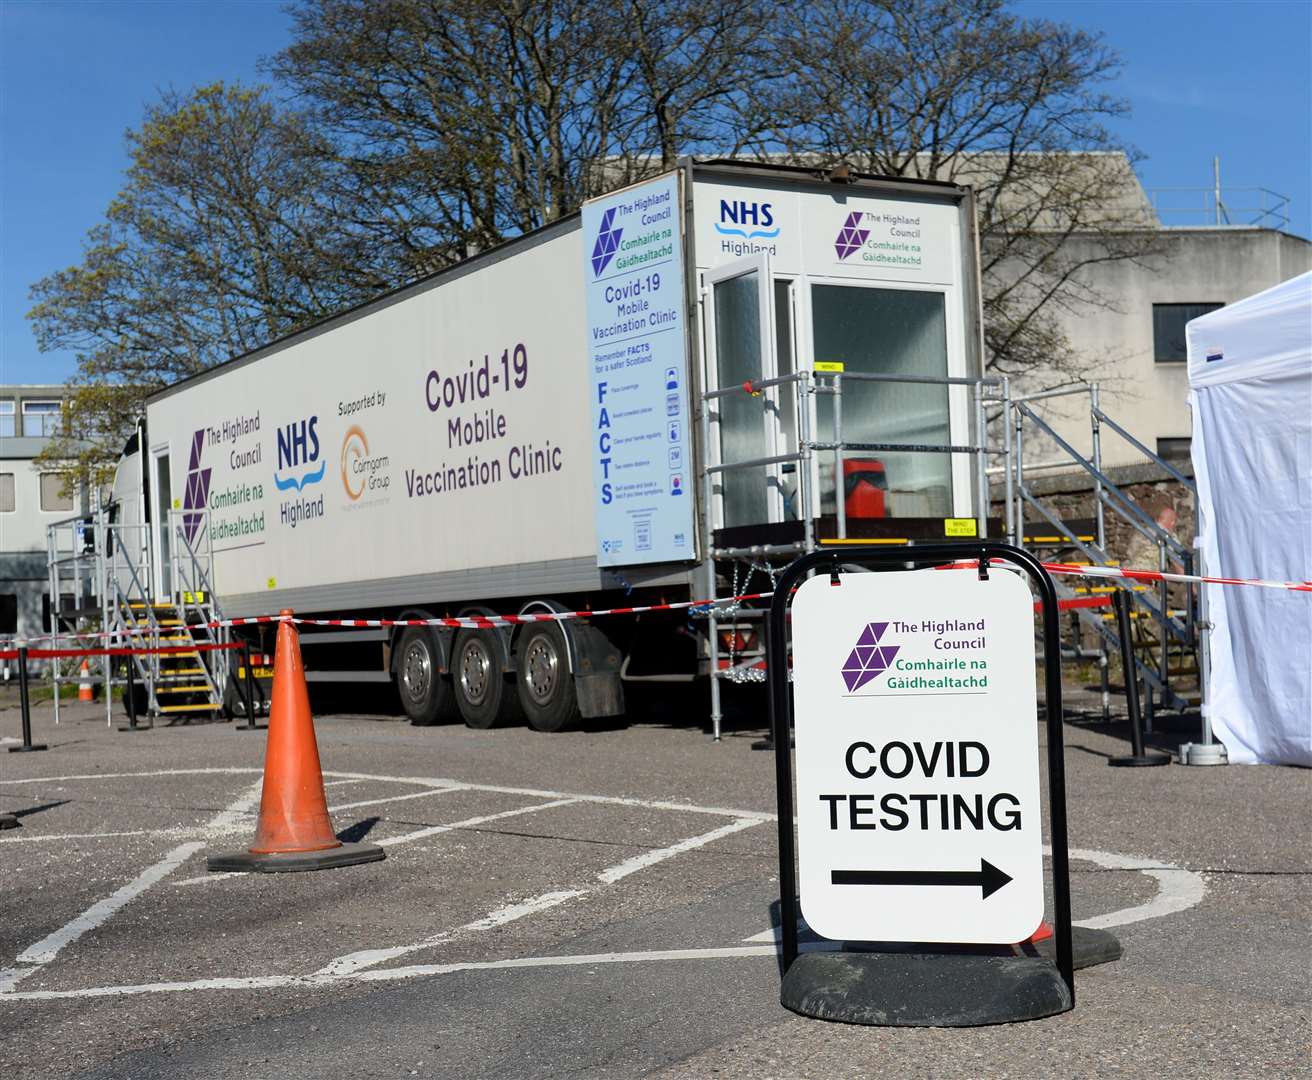 Testing kits are being handed out at locations across the Highlands. Picture: Gary Anthony.